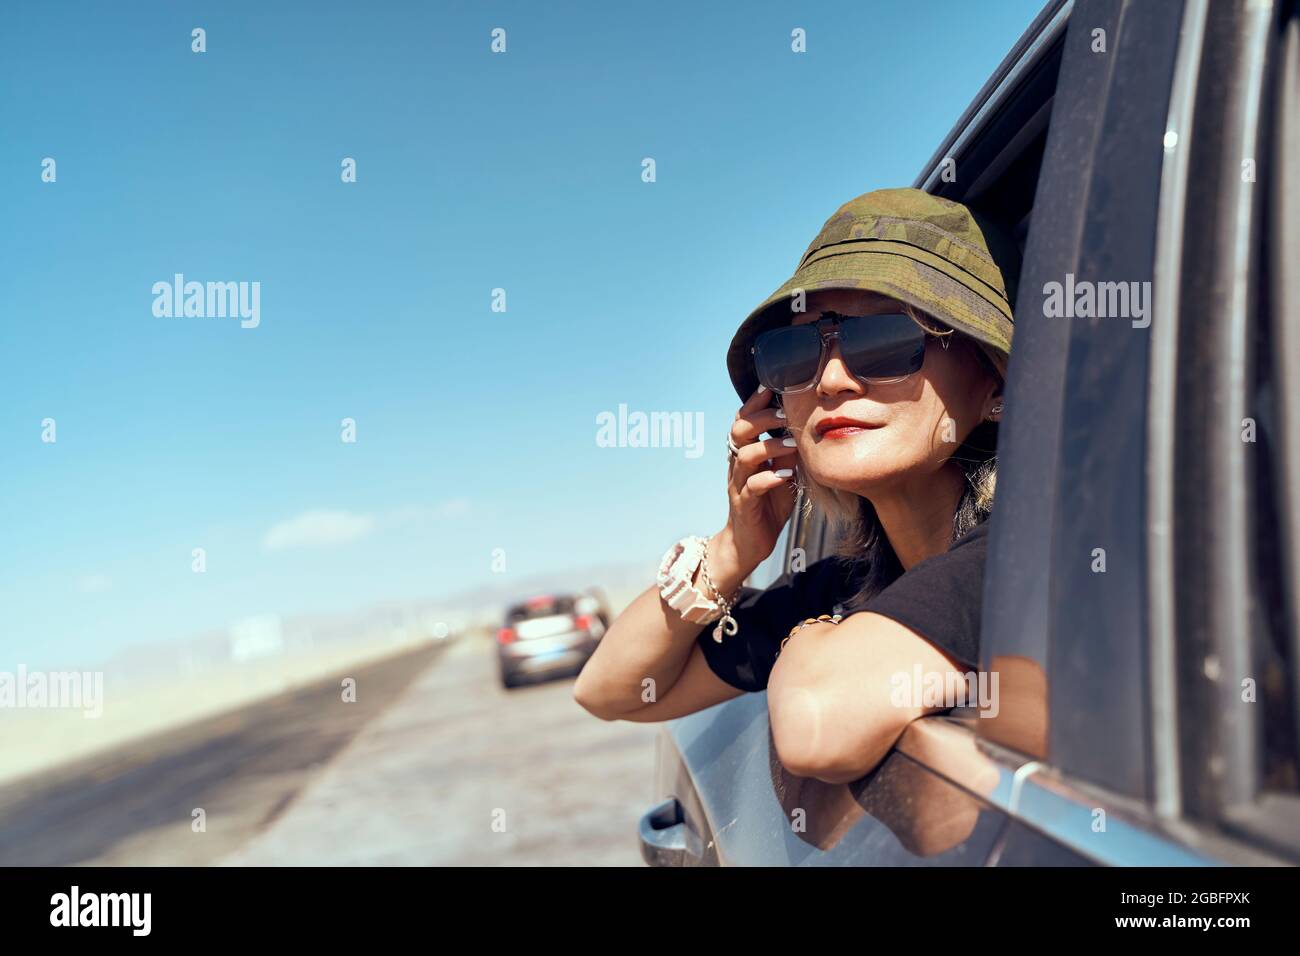 asian woman traveler with hat and sunglasses sticking head out of rear window of car looking at view Stock Photo